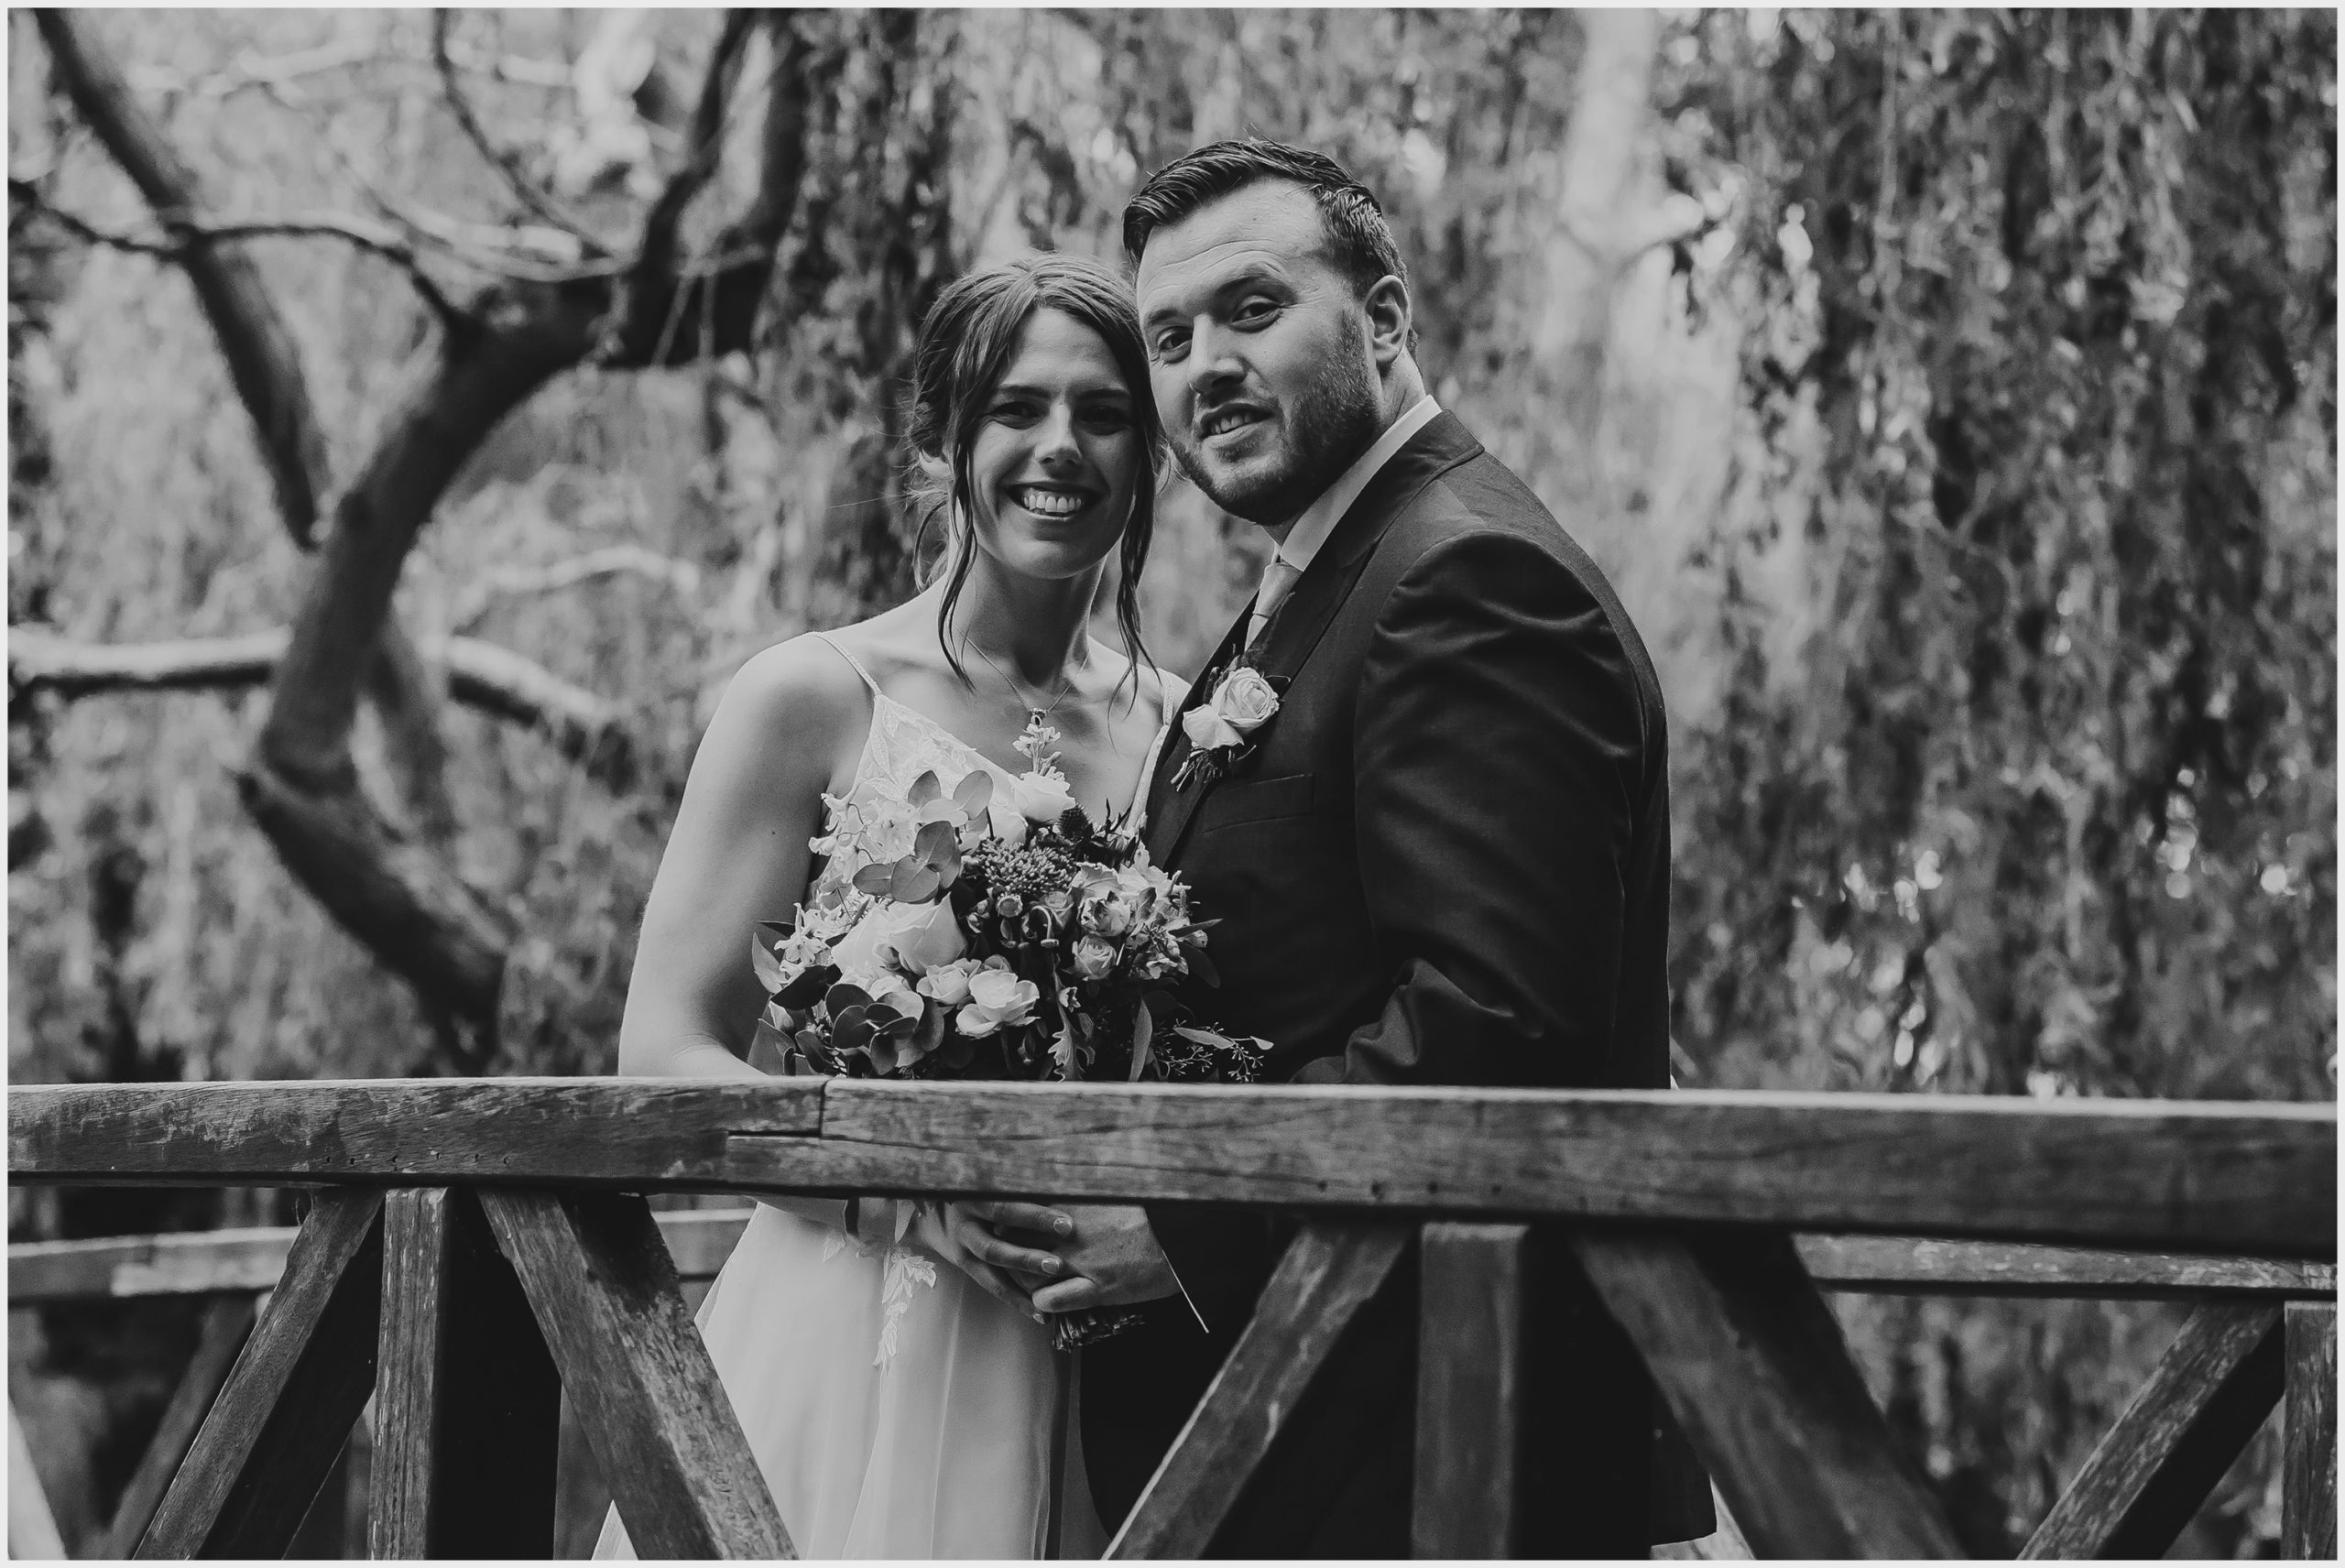 A beaming bride and groom look at the camera during their couples photoshoot at The Grosvenor Pulford Hotel and Spa.  Image captured by Helena Jayne Photography a wedding photographer based in Chester